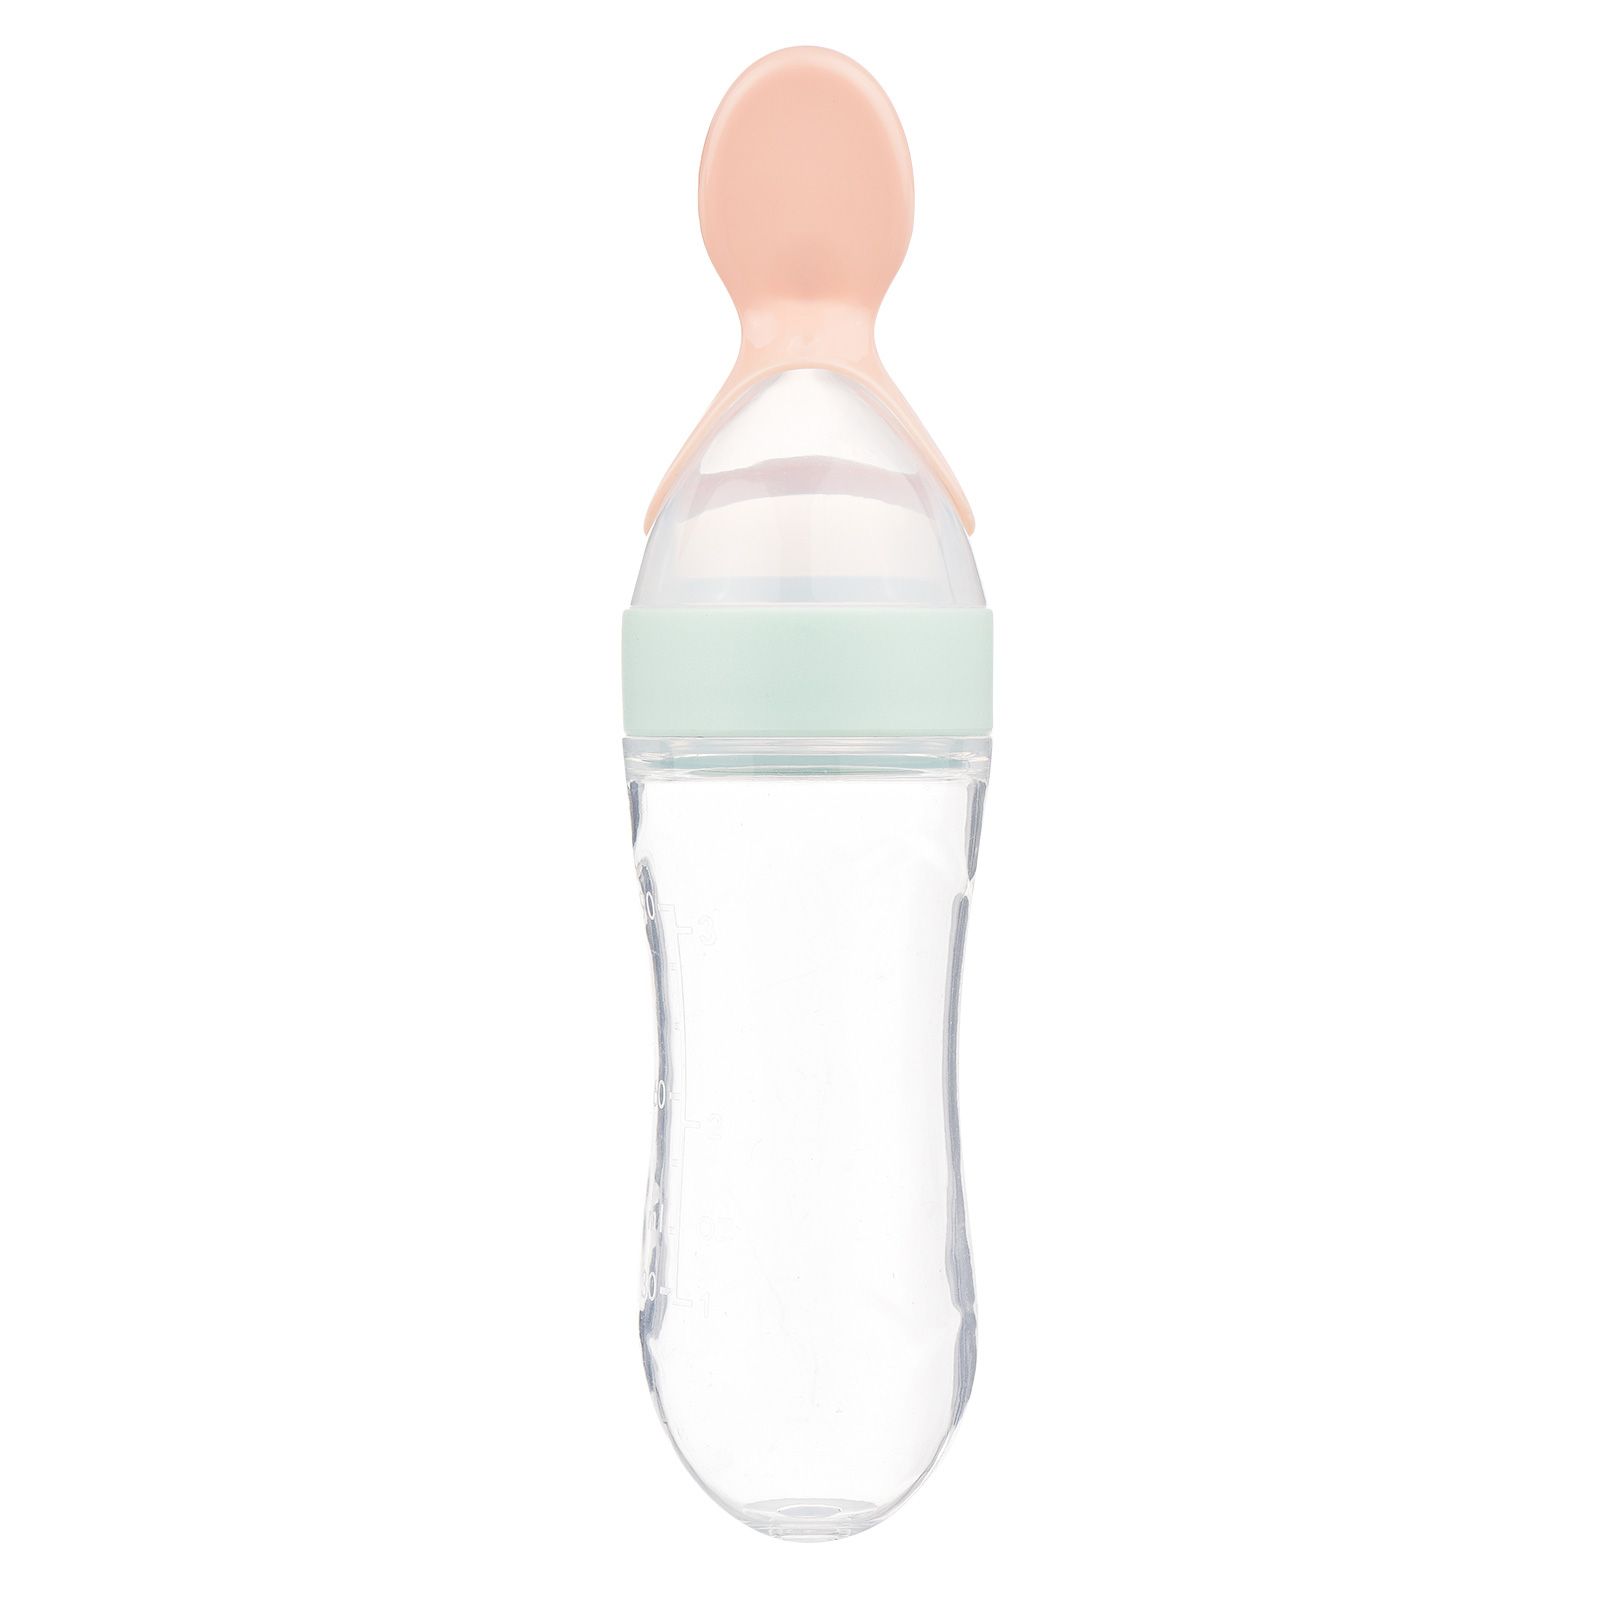 Silicone Baby Food Dispensing Spoon, 90ml / 3oz Infant Food Squeeze Feeder